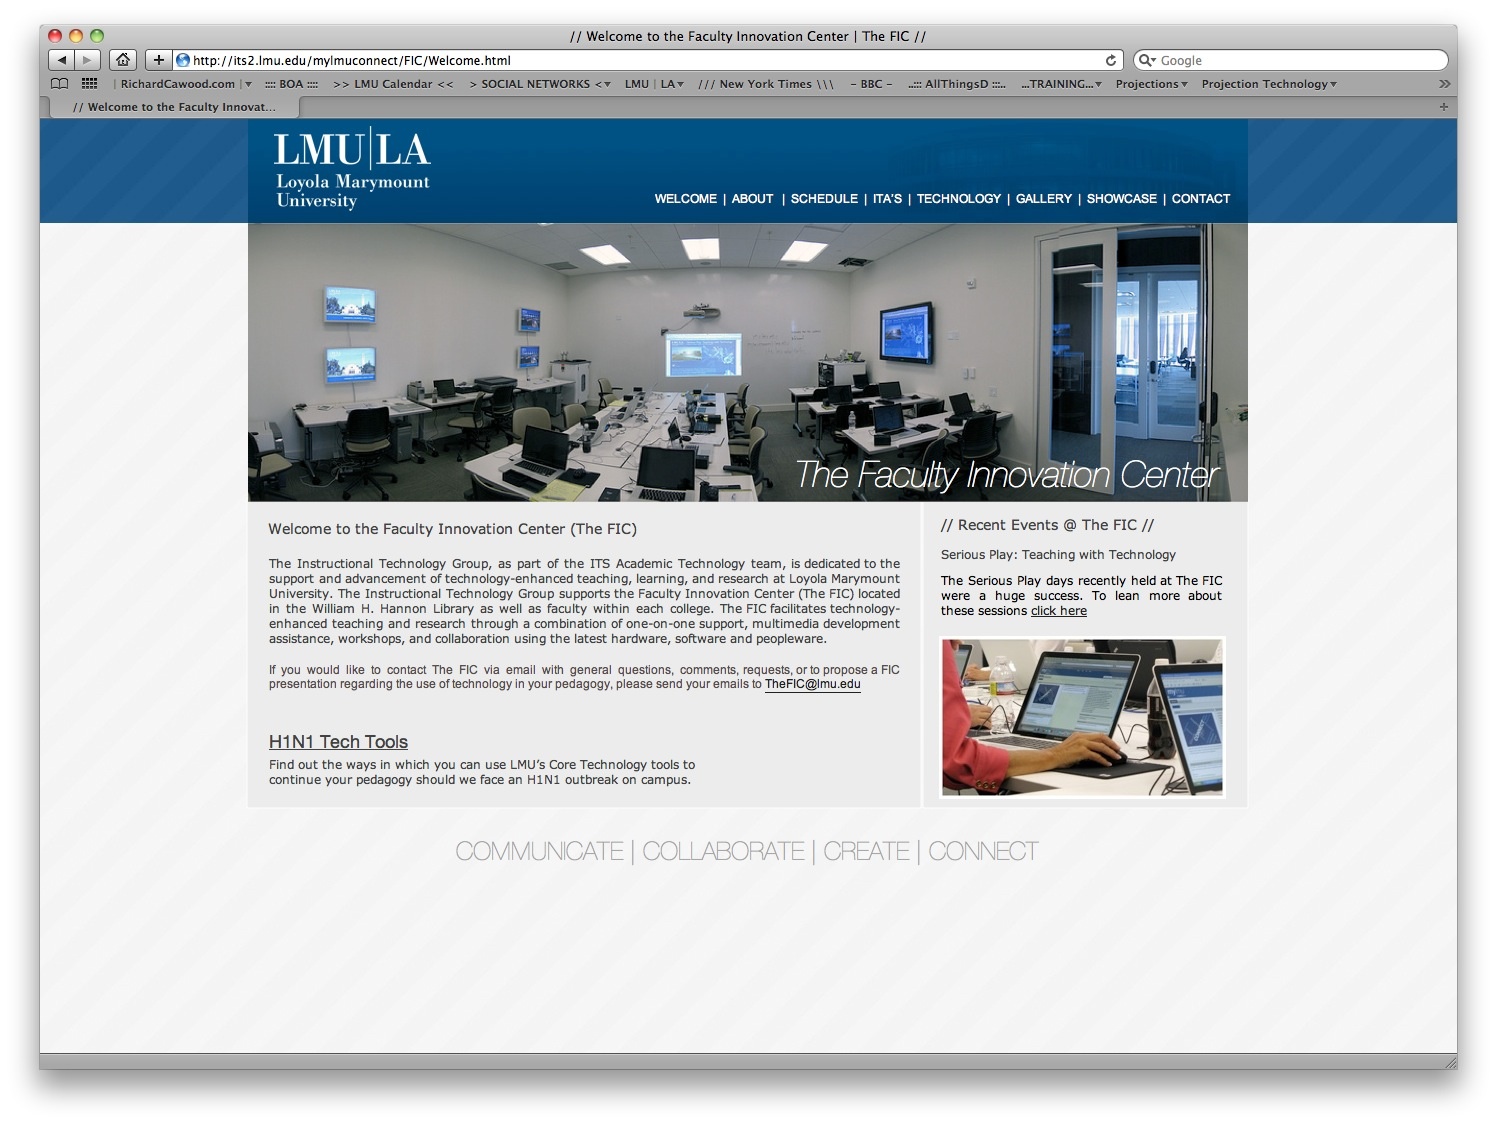 The new faculty innovation center website   the fic fd0004